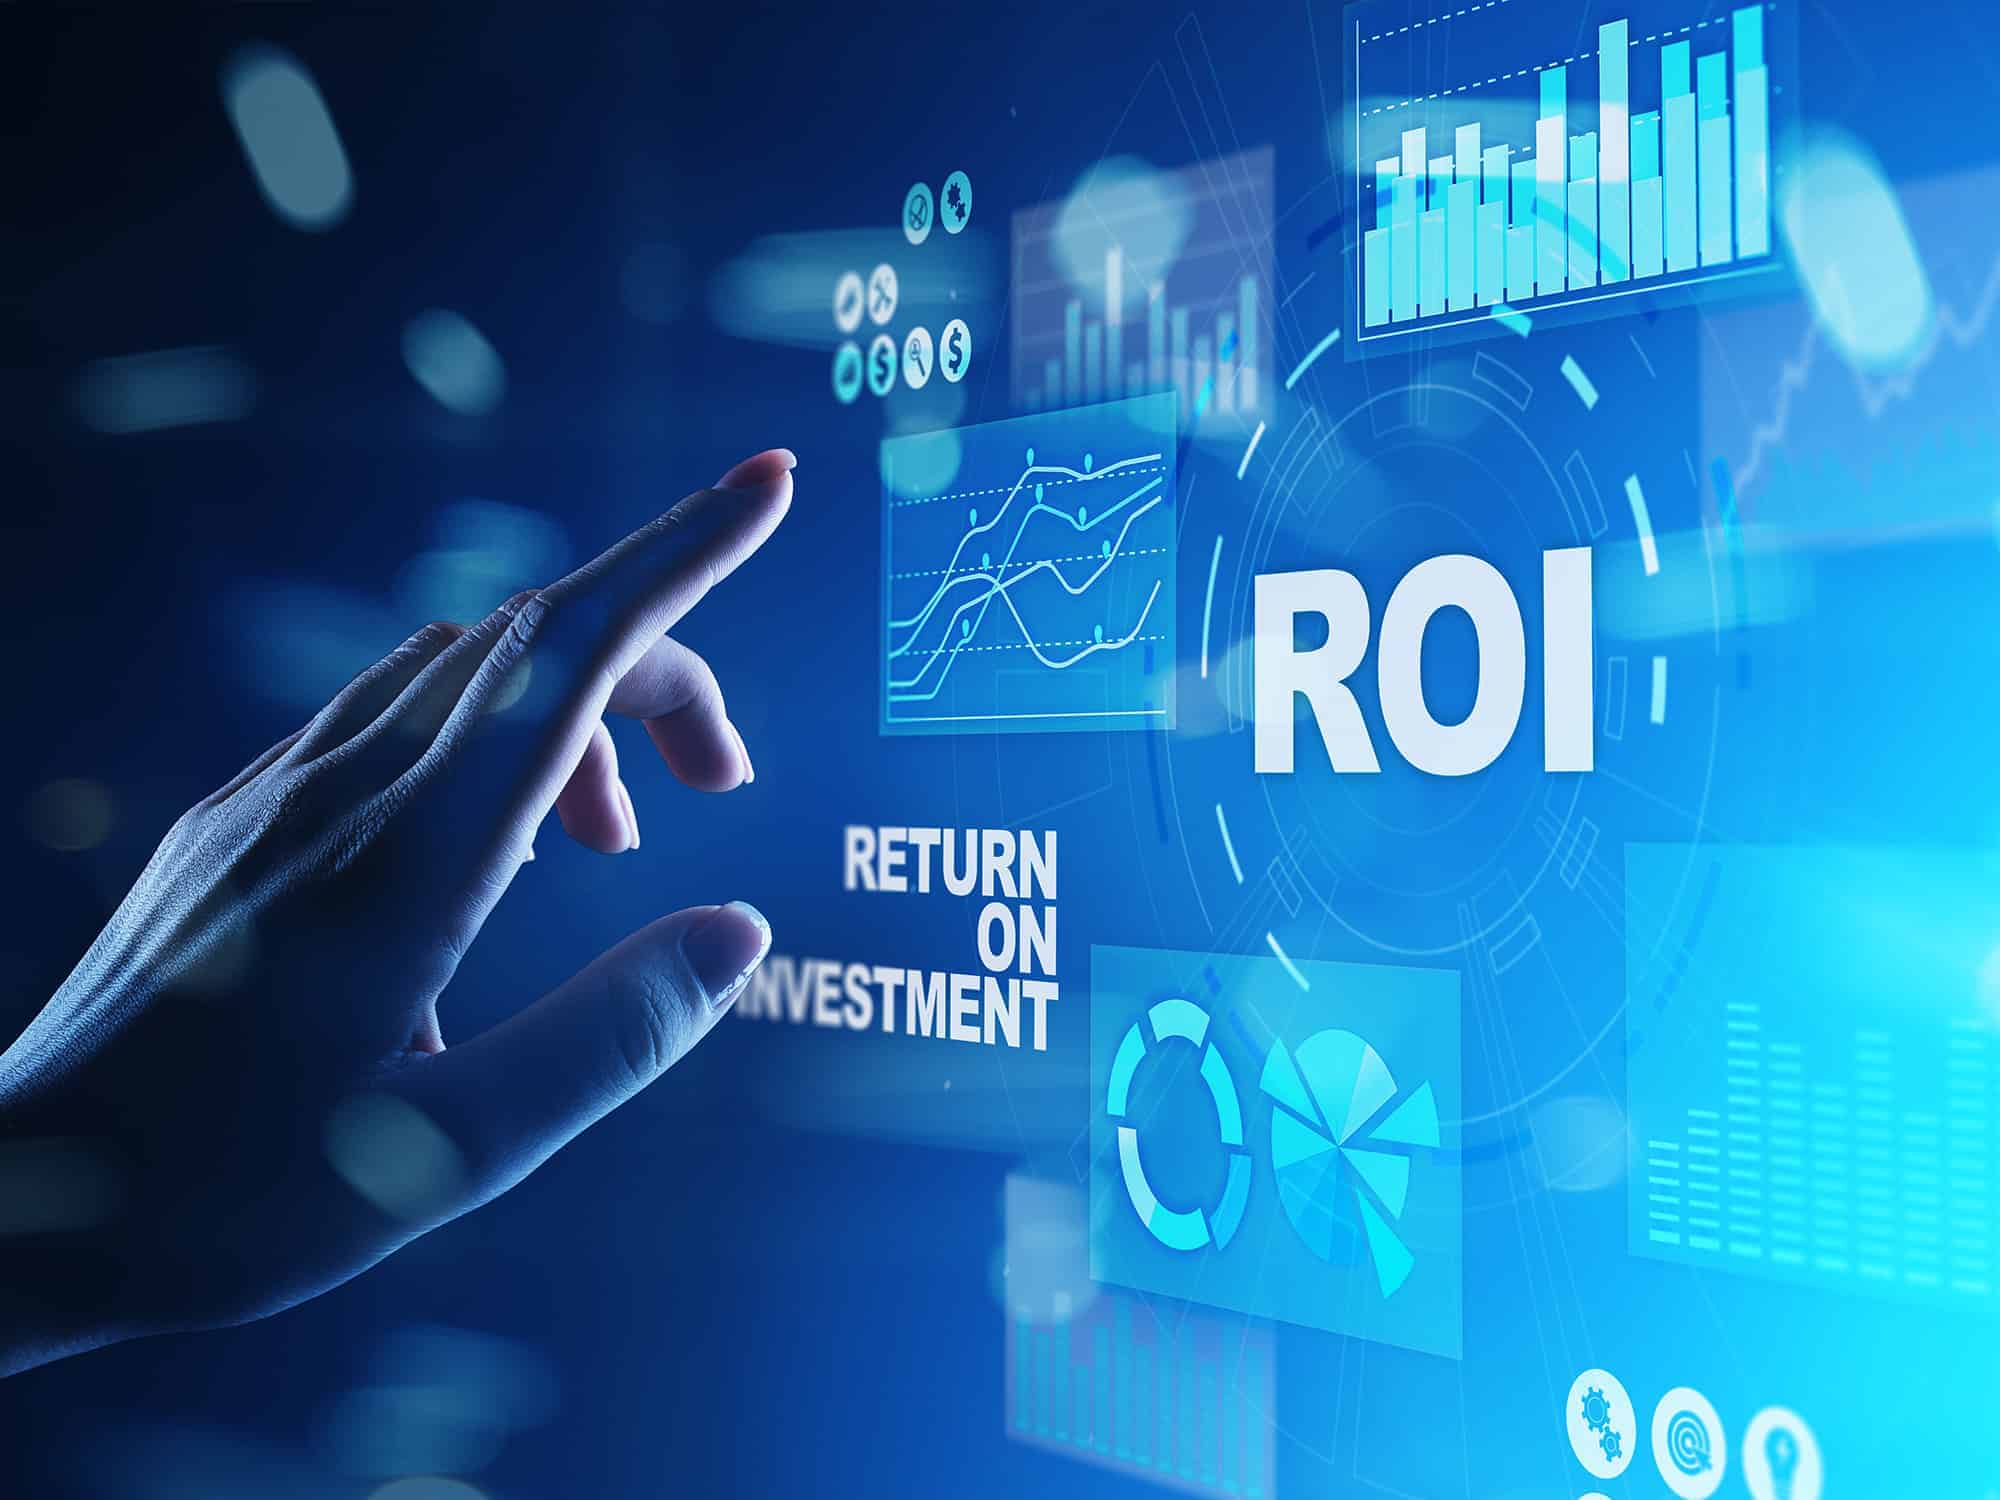 Dental ROI: How To Get the Most From Your Dental Marketing Budget